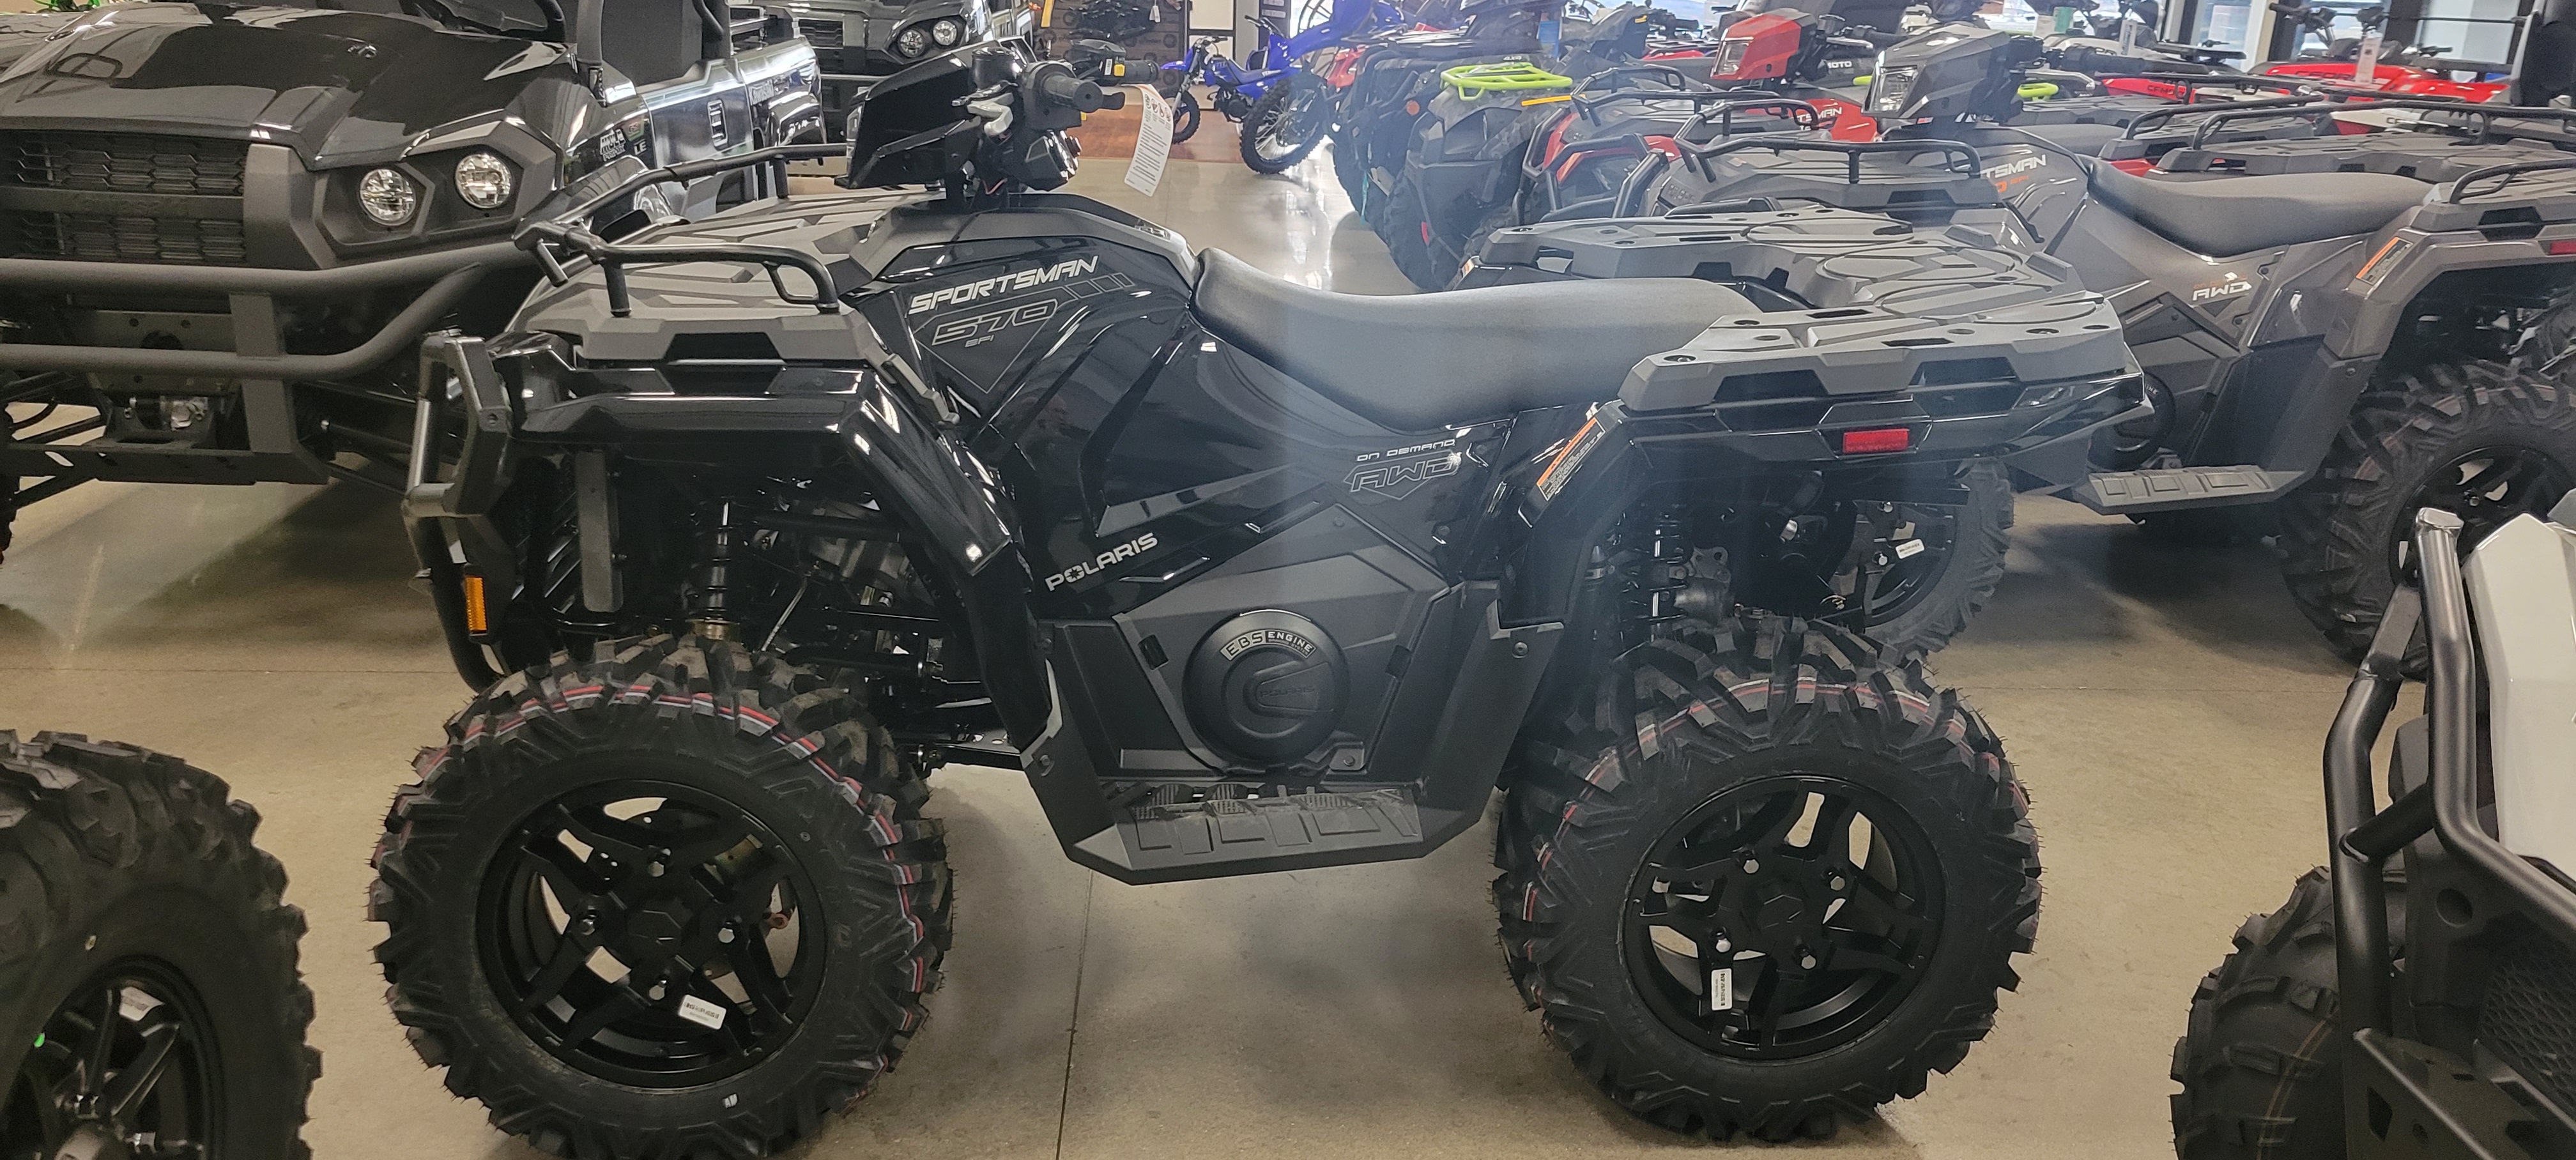 2023 Polaris Sportsman 570 Trail at Brenny's Motorcycle Clinic, Bettendorf, IA 52722